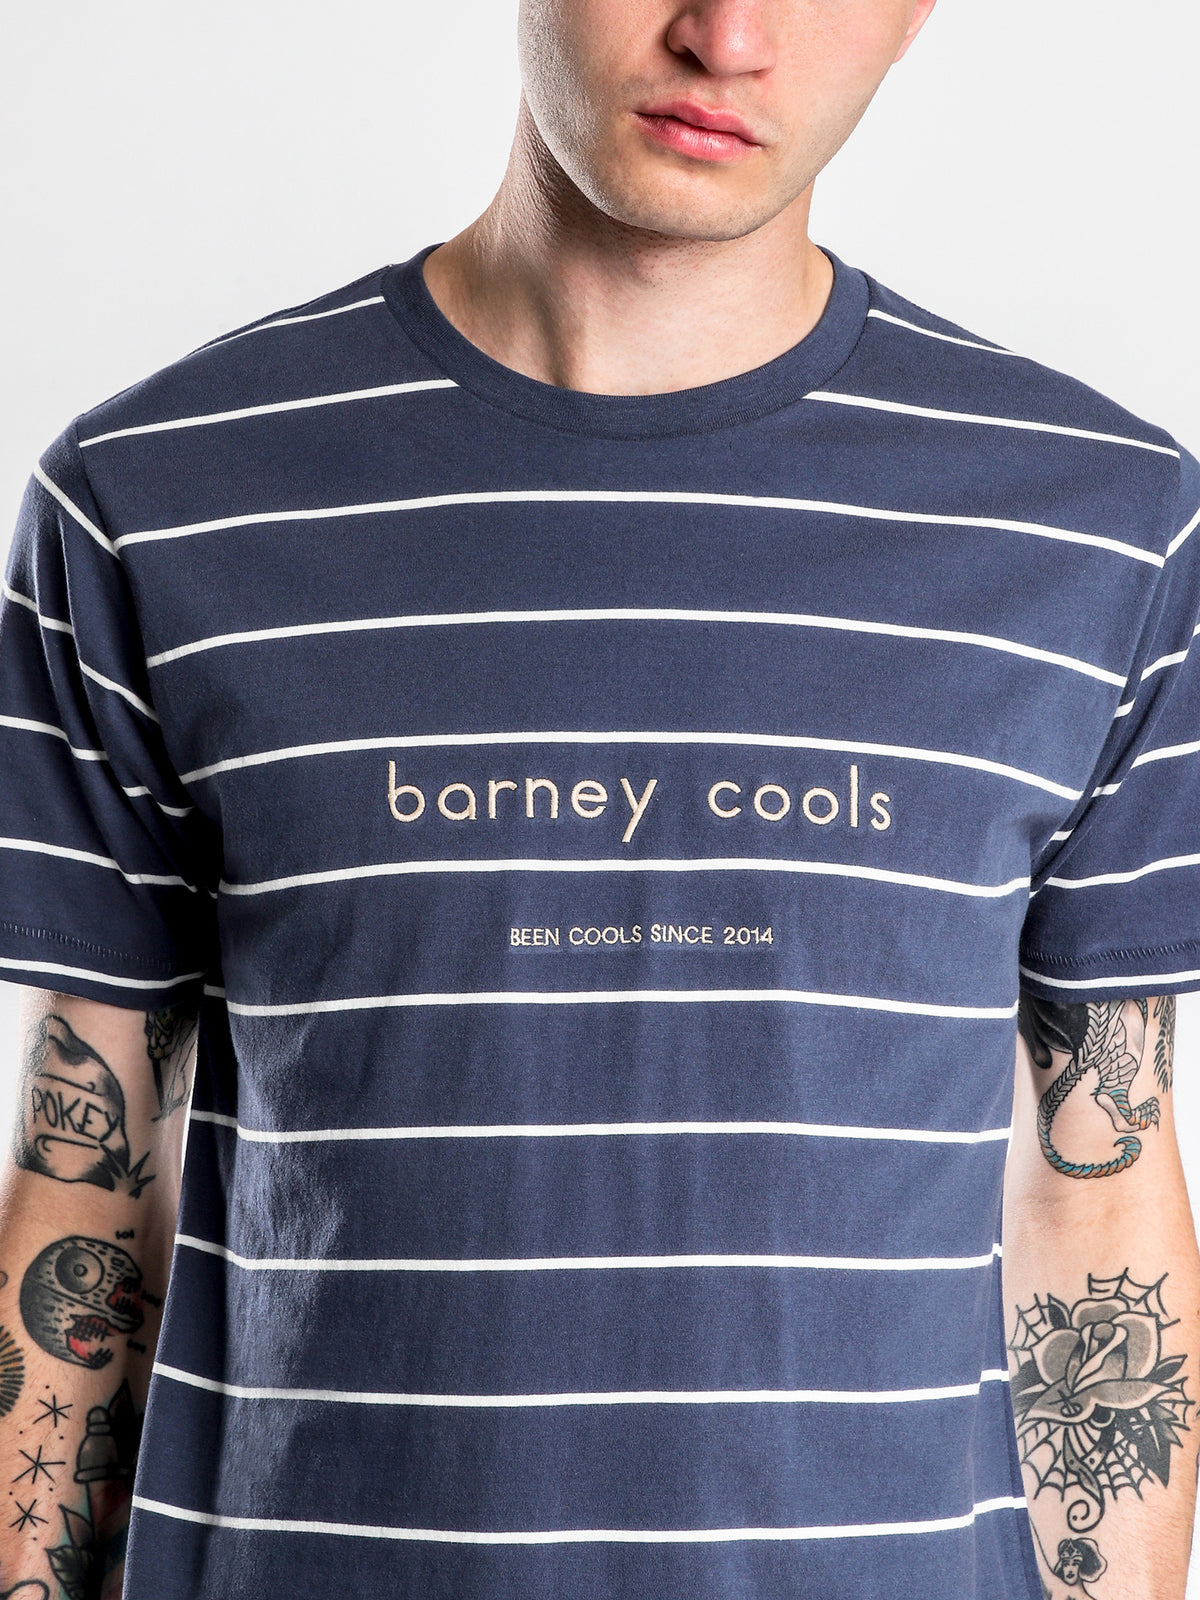 Barney Cools T-Shirt in Navy Stripe